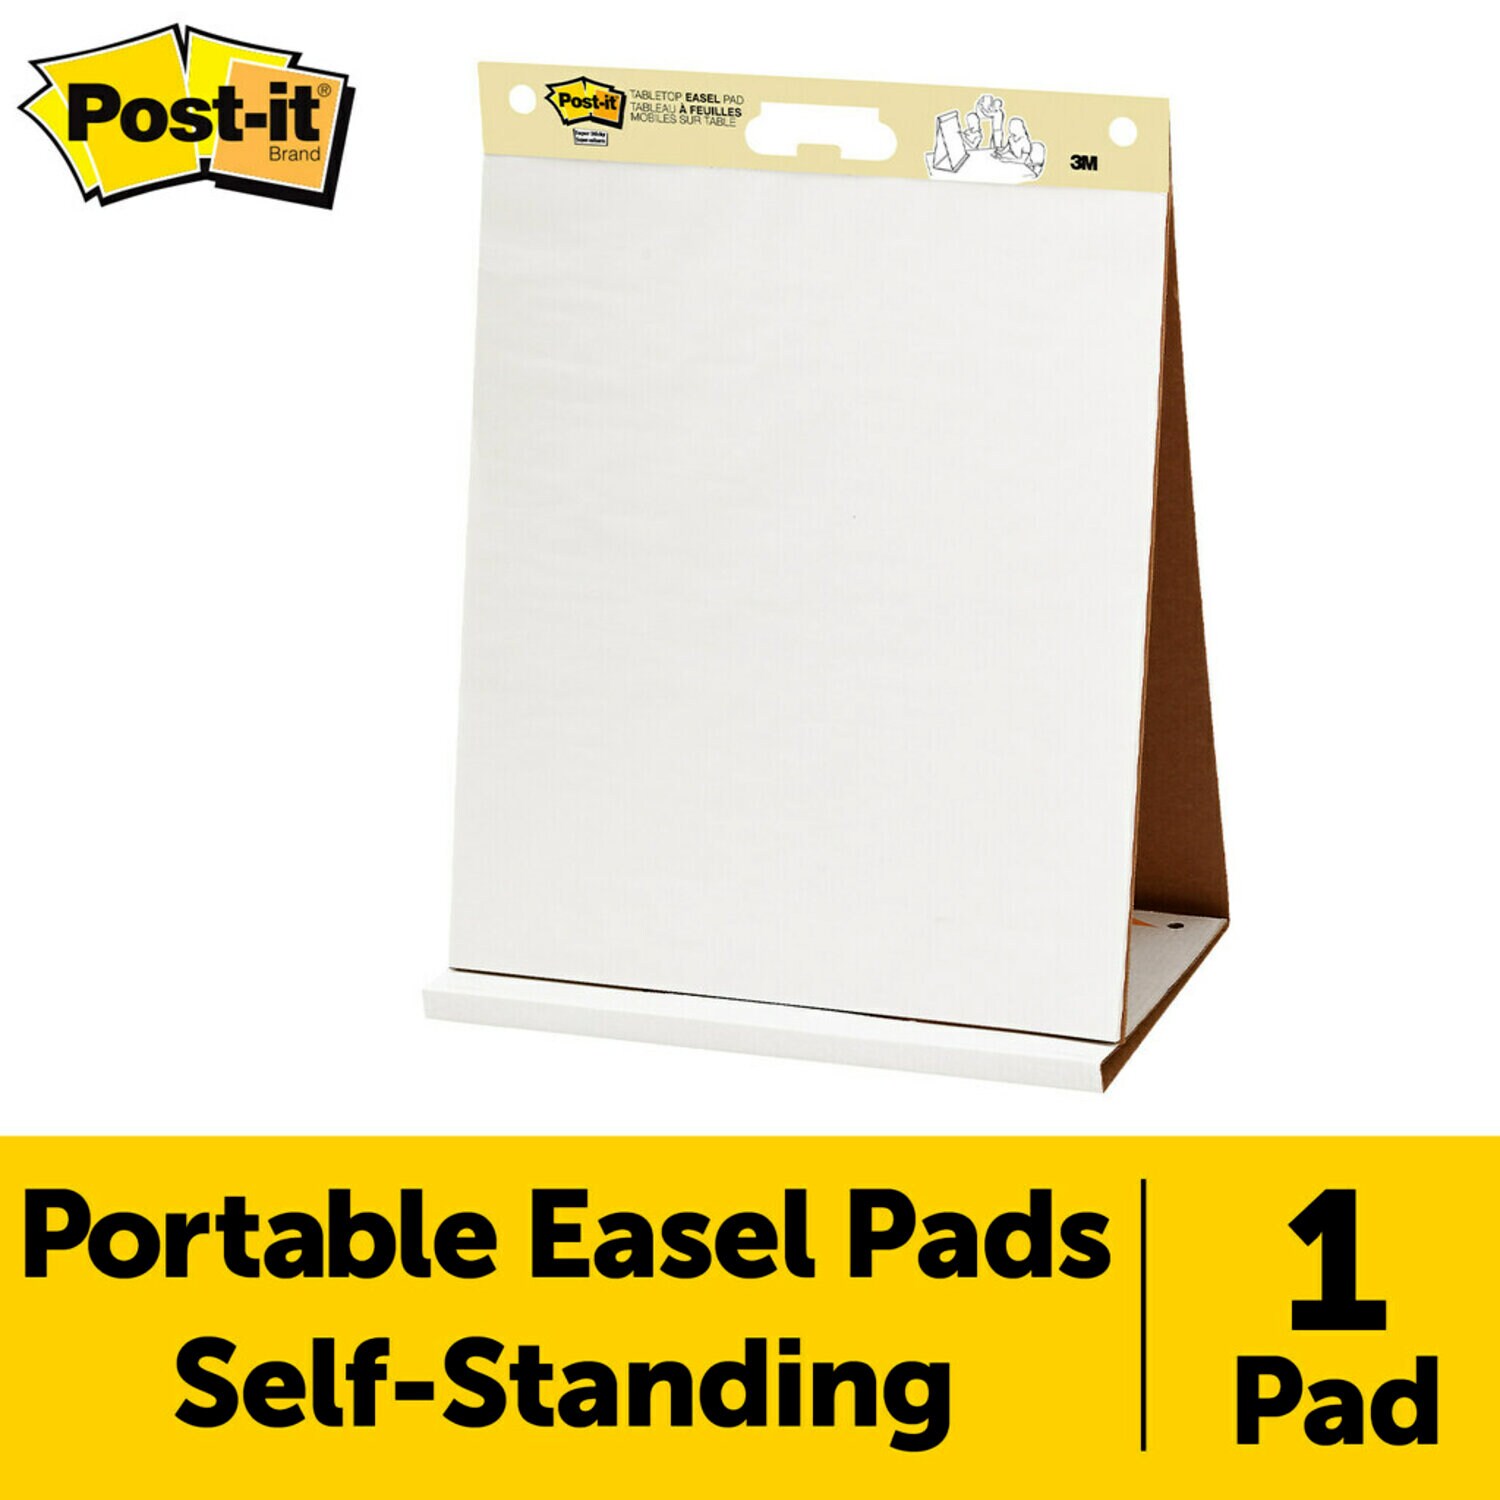 7100171586 - Post-it Super Sticky Tabletop Easel Pad 563R, 20 in. x 23 in. x .5 in